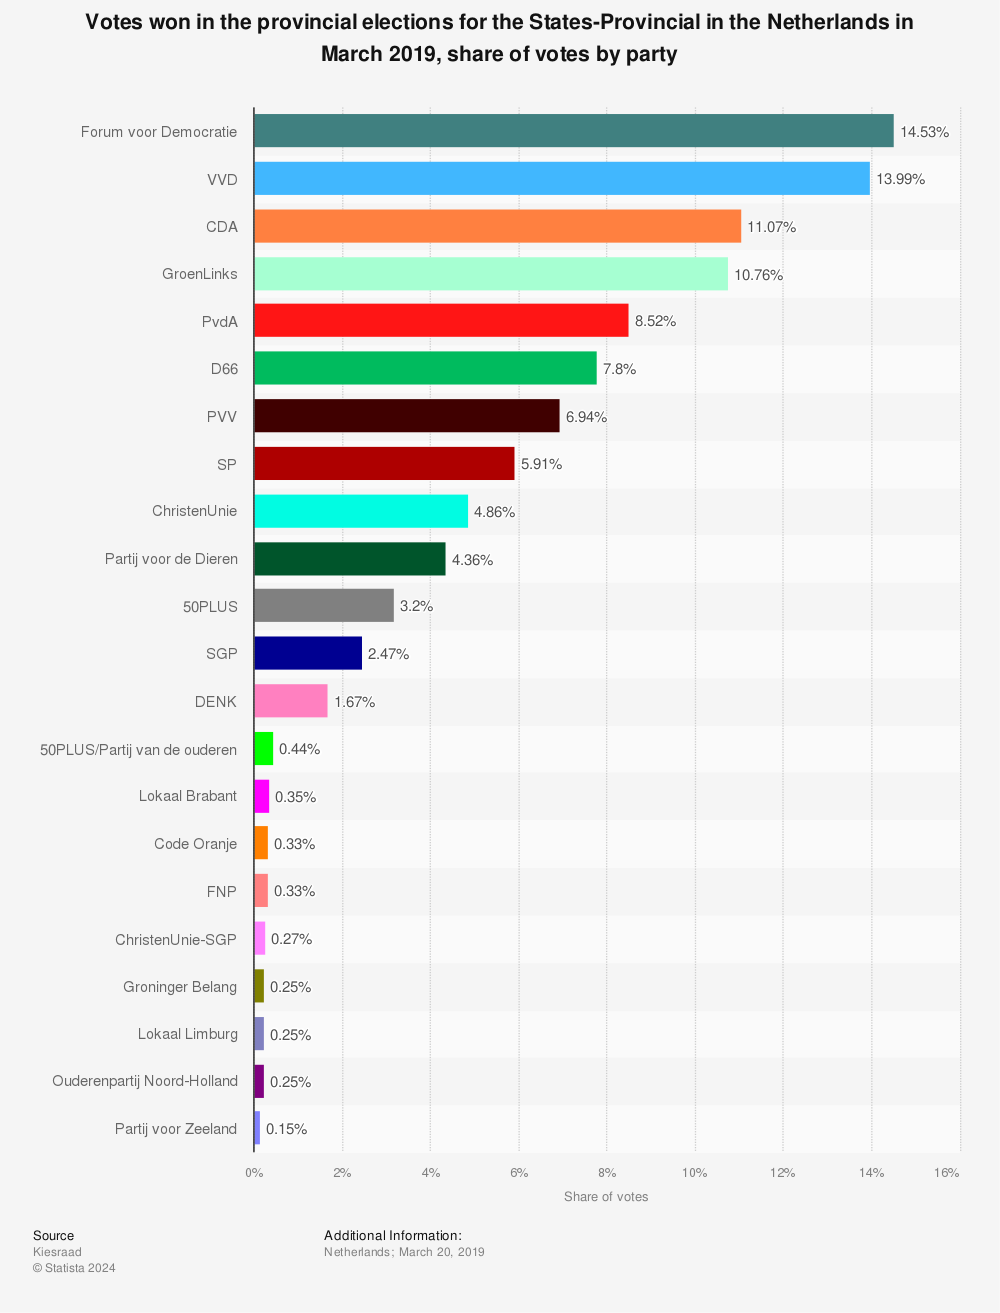 Statistic: Votes won in the provincial elections for the States-Provincial in the Netherlands in March 2019, share of votes by party | Statista